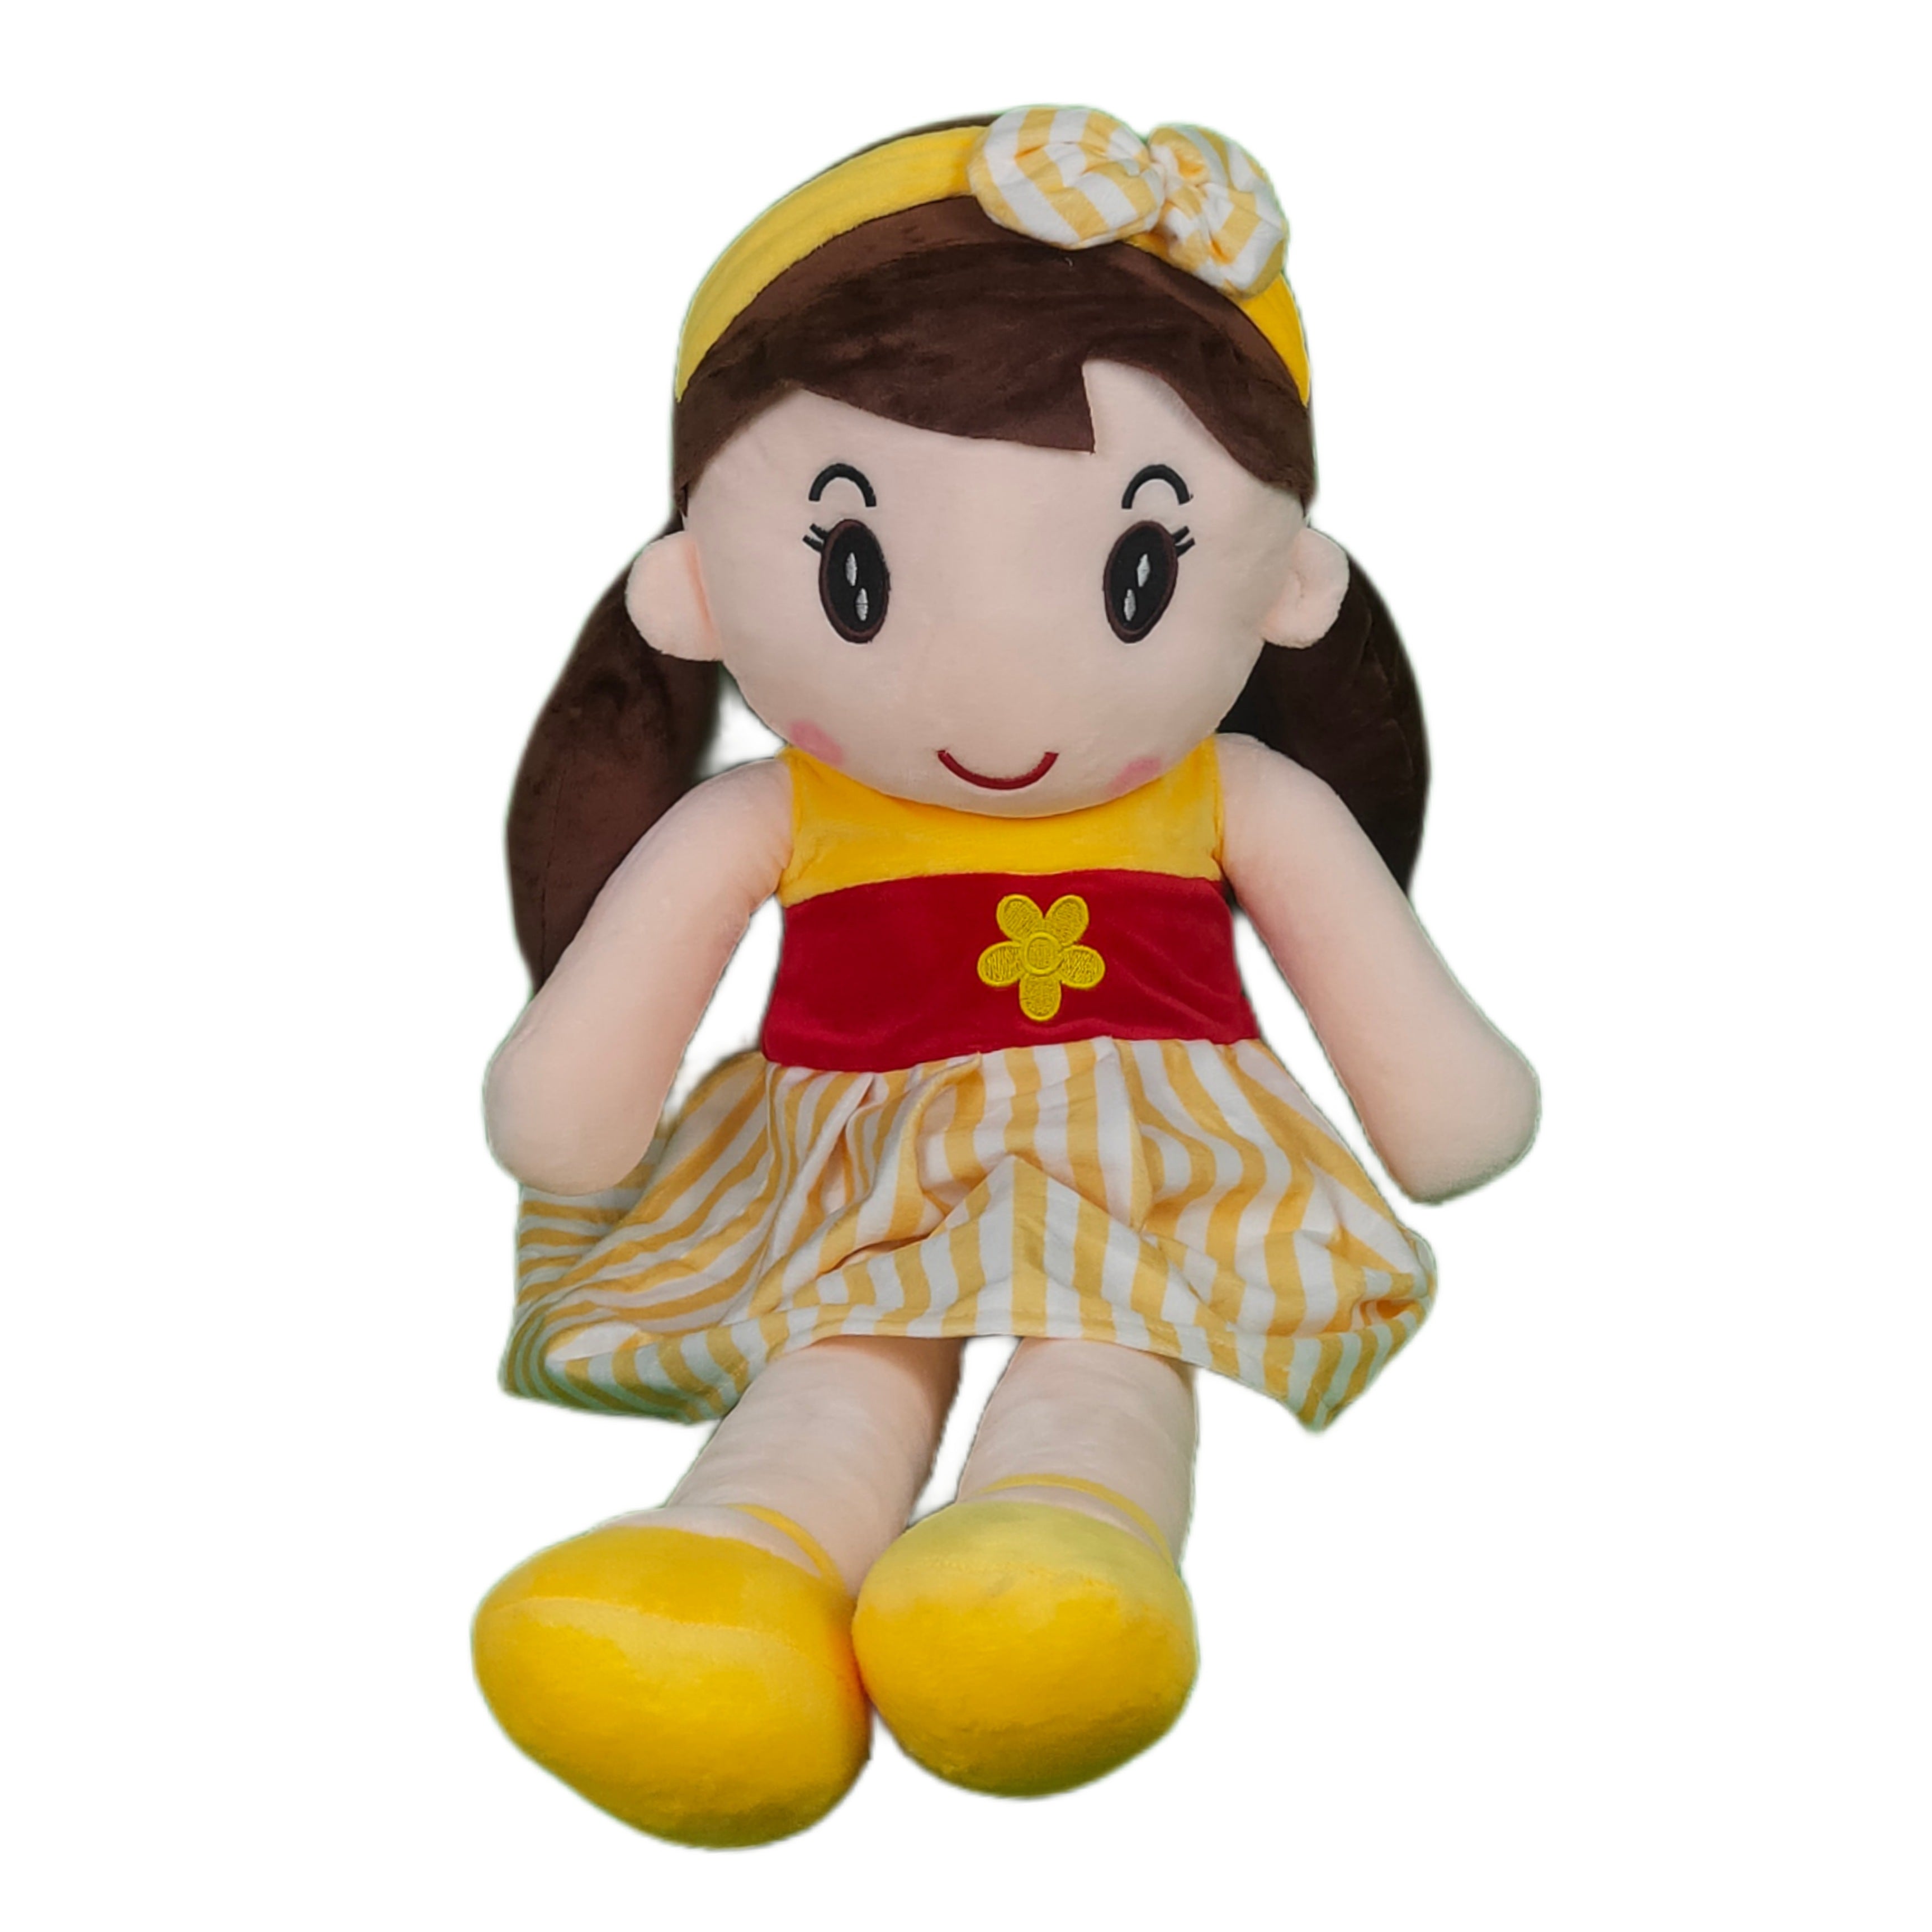 Play Hour Cute Rag Doll Plush Soft Toy Wearing Yellow & White Stripes Frock for Ages 3 Years and Up, 80cm